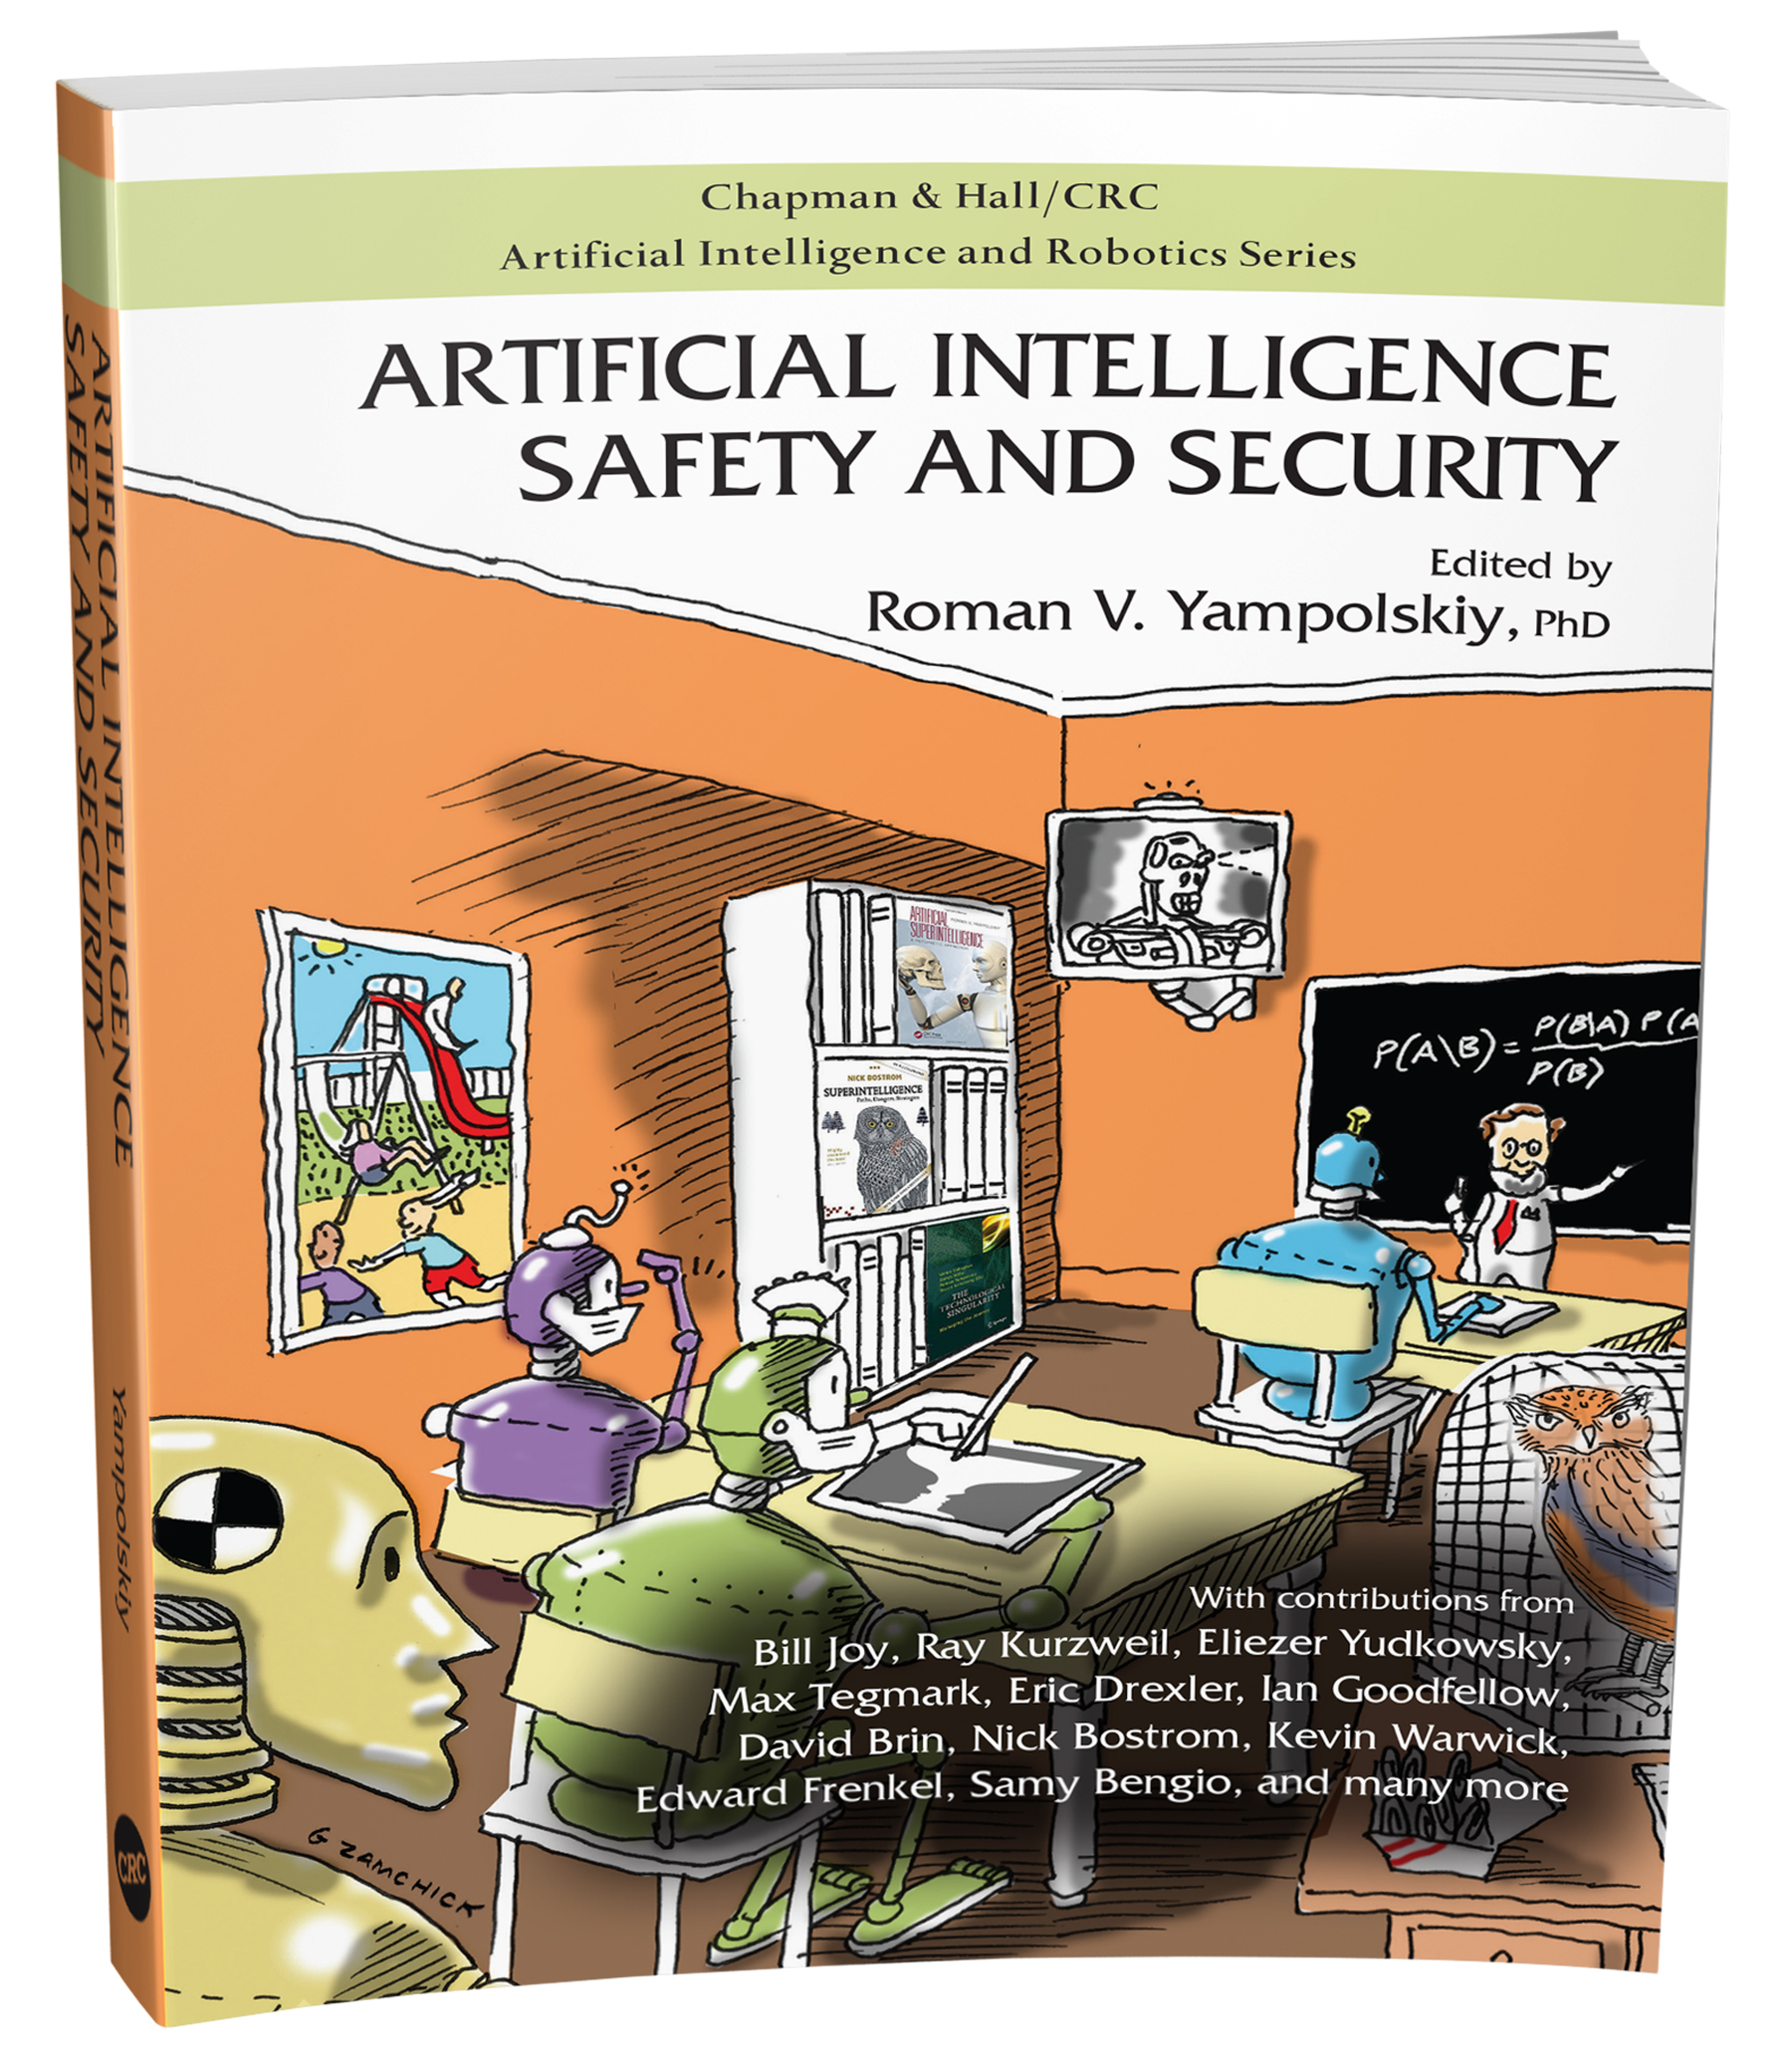 Roman Yampolskiy on Artificial Intelligence Safety and Security